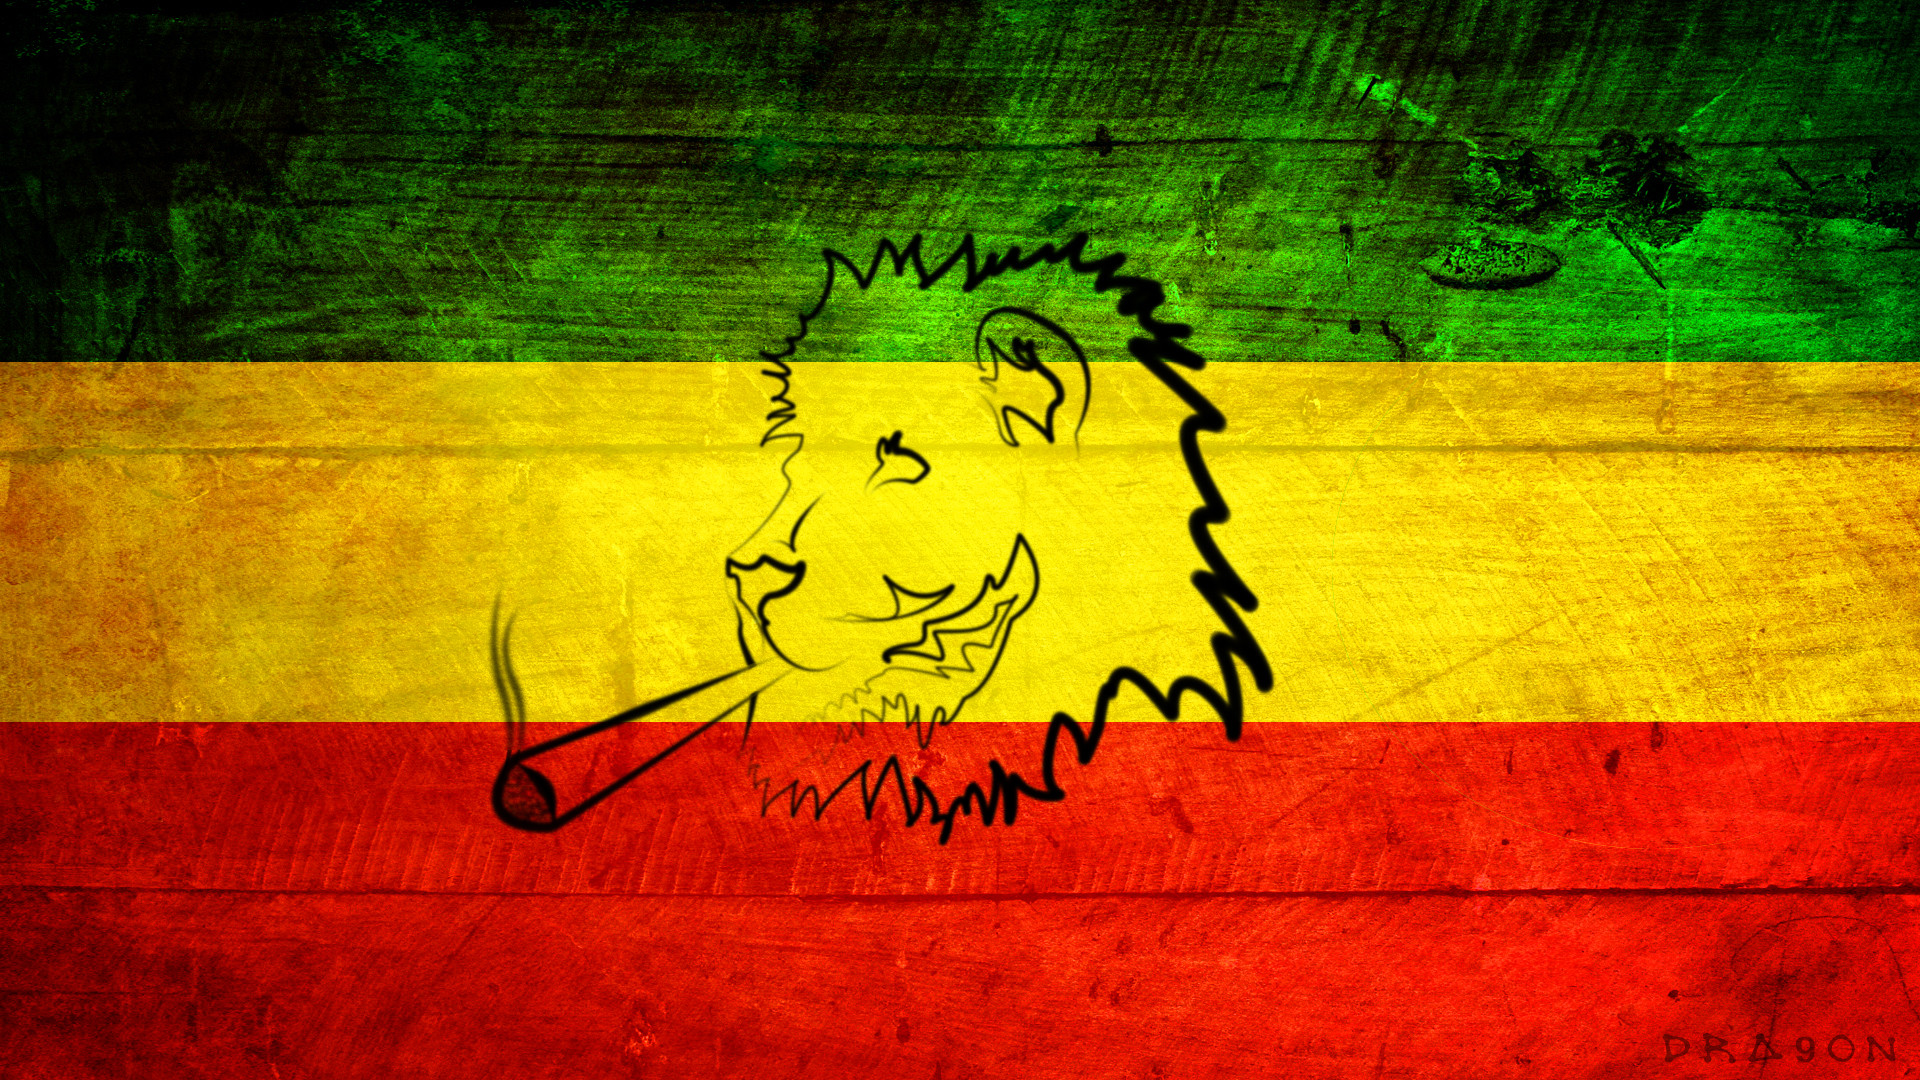 1920x1080 undefined Rasta Lion Wallpapers Wallpapers Adorable | HD Wallpapers |  Pinterest | Rasta lion and Wallpaper